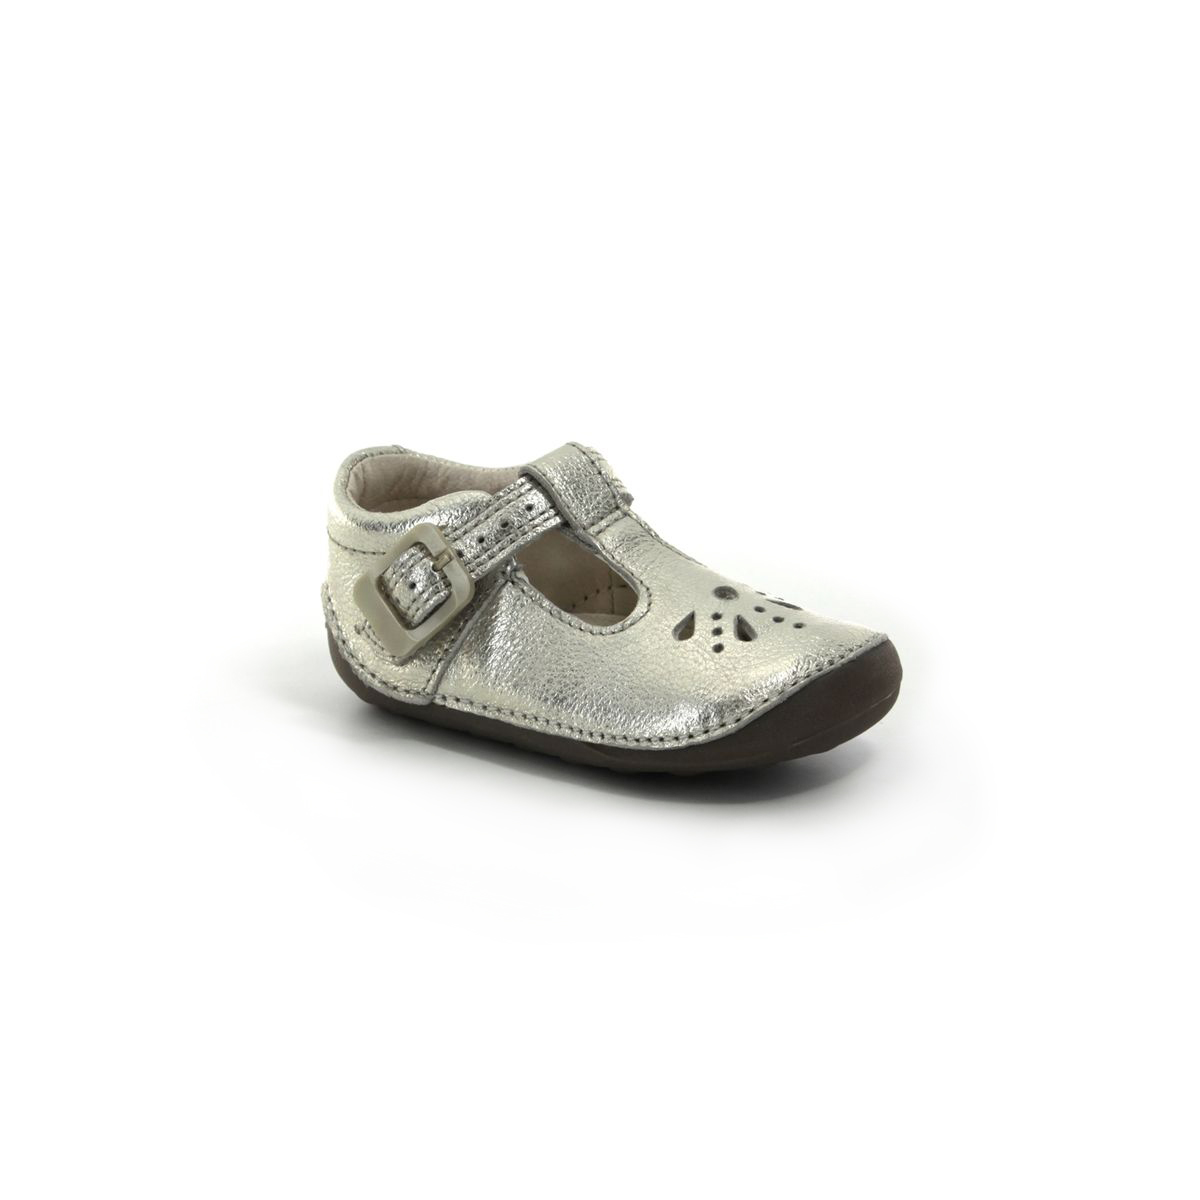 clarks baby shoes singapore off 64 